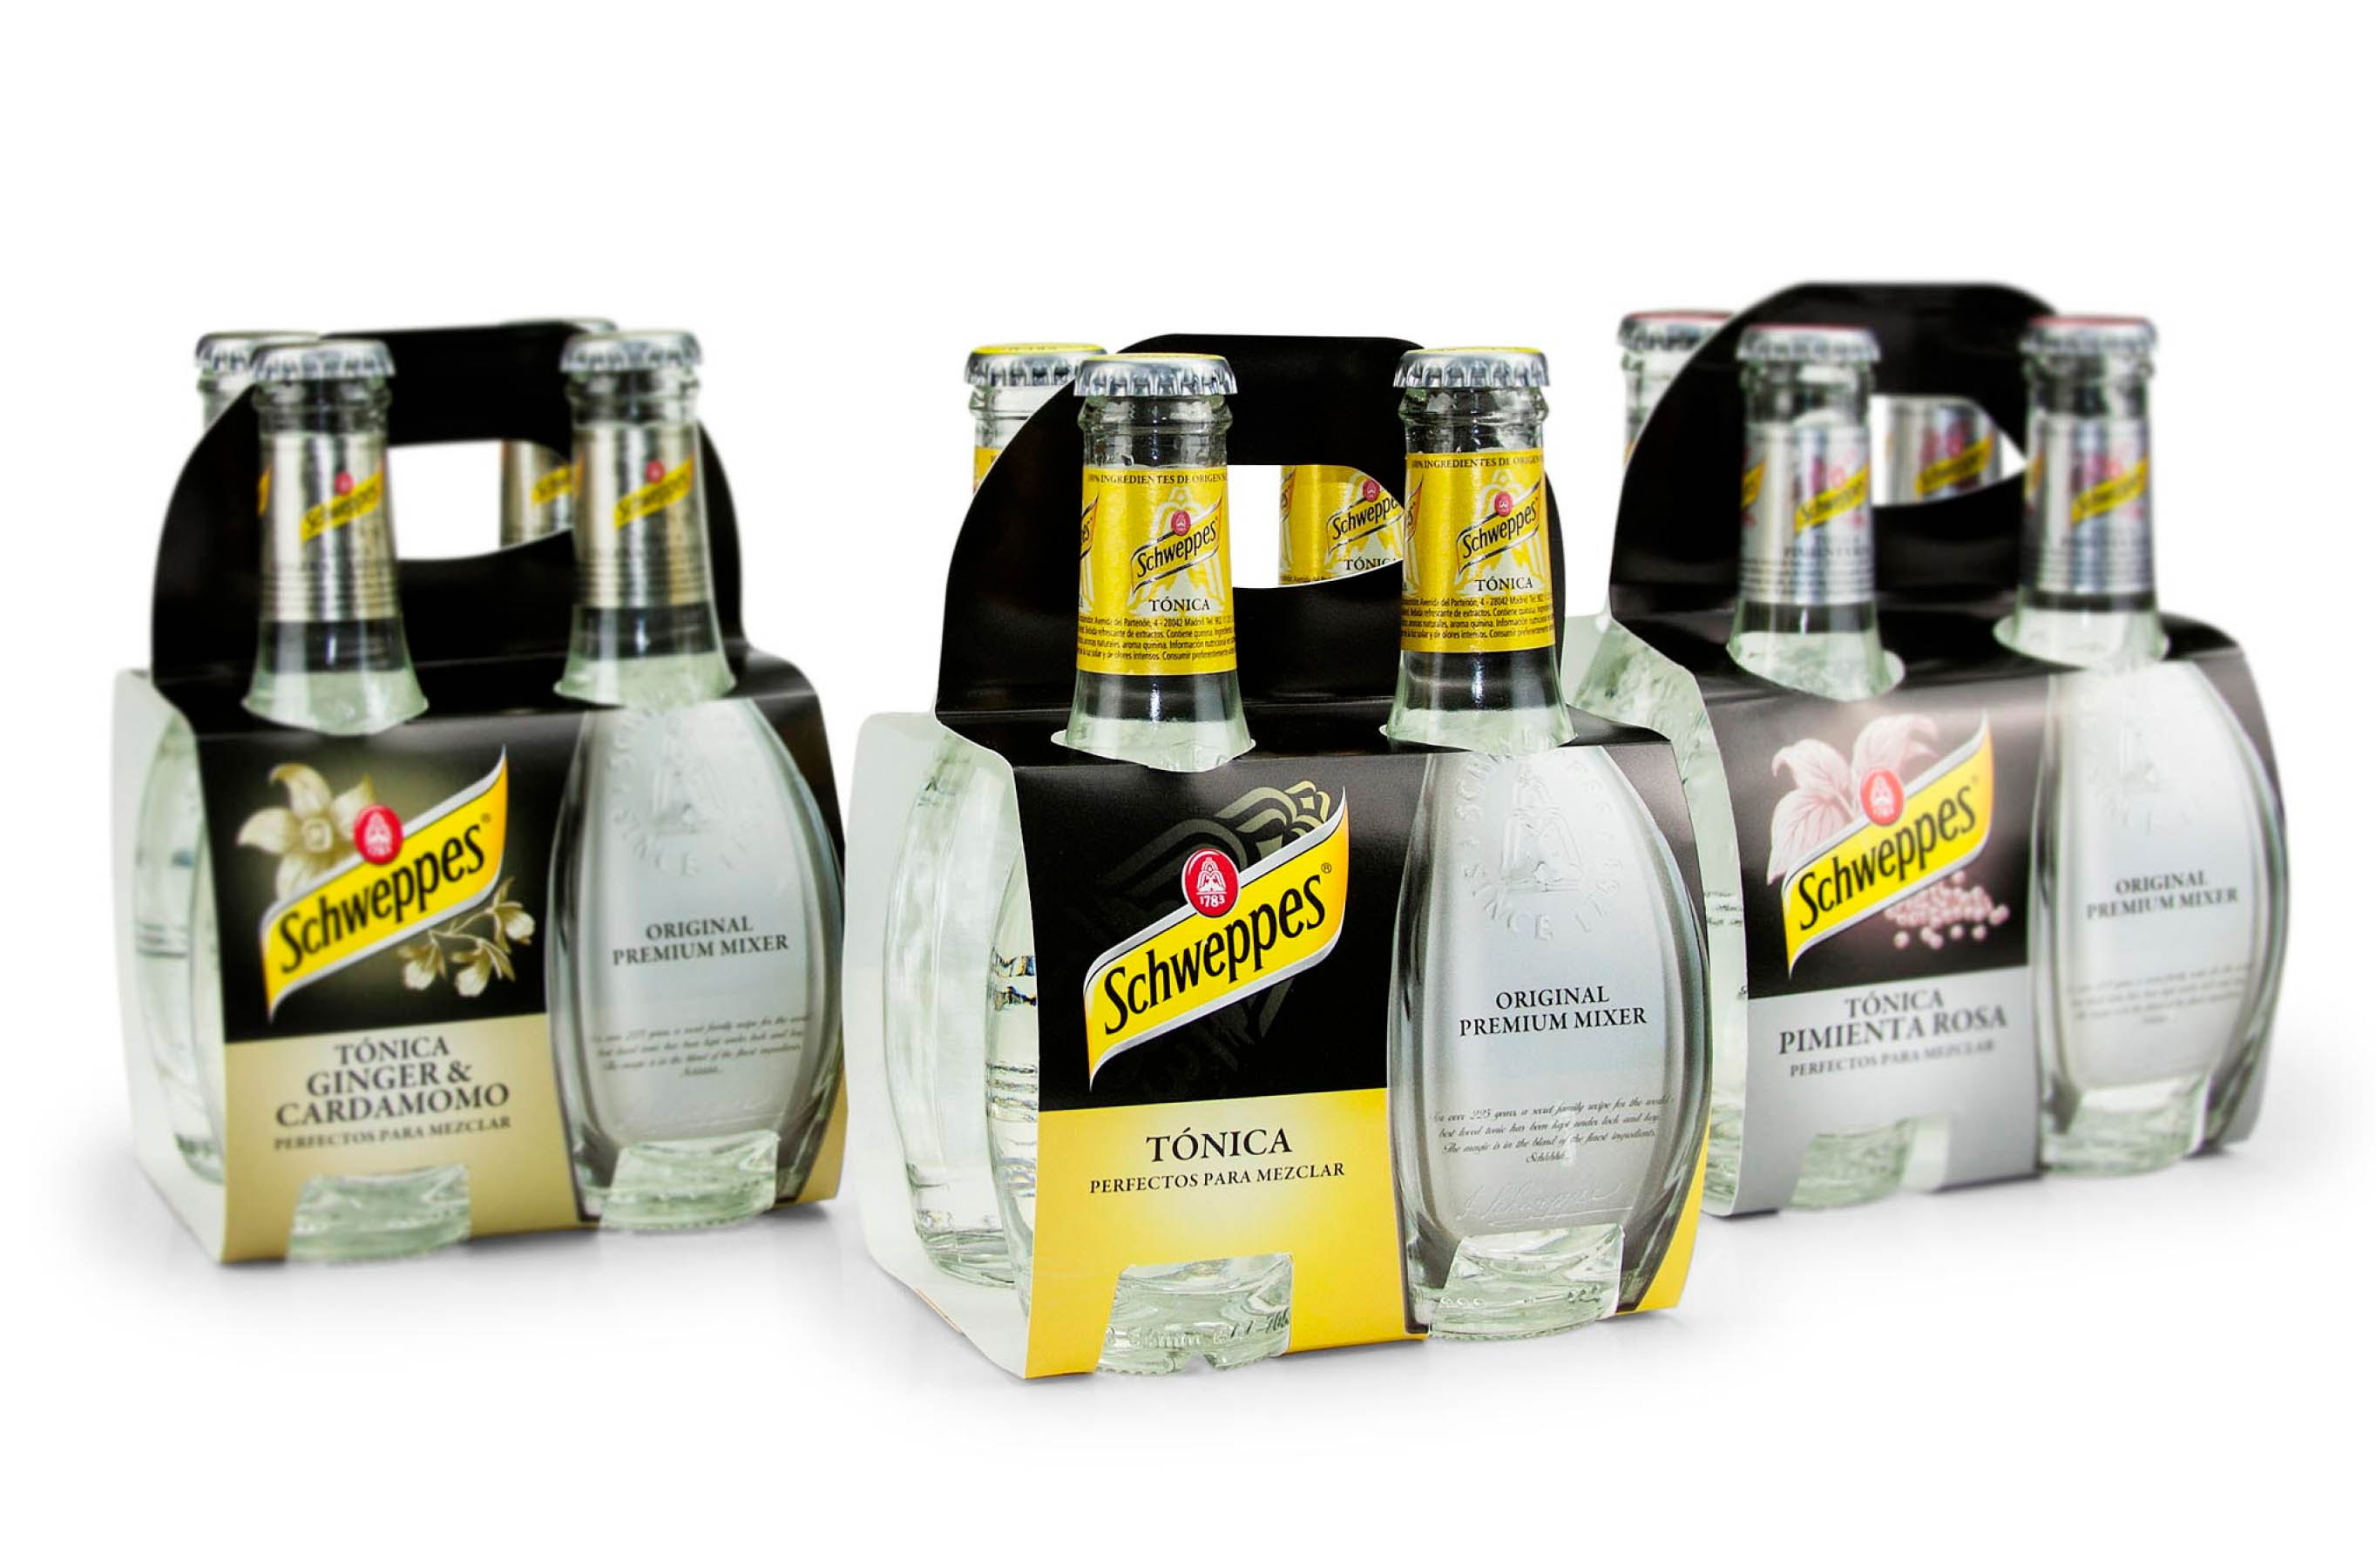 Schweppes is a leading international brand in the tonic market. It arrived in Spain in 1957 and since then, has created trends and culture through numerous innovations in mixology.
